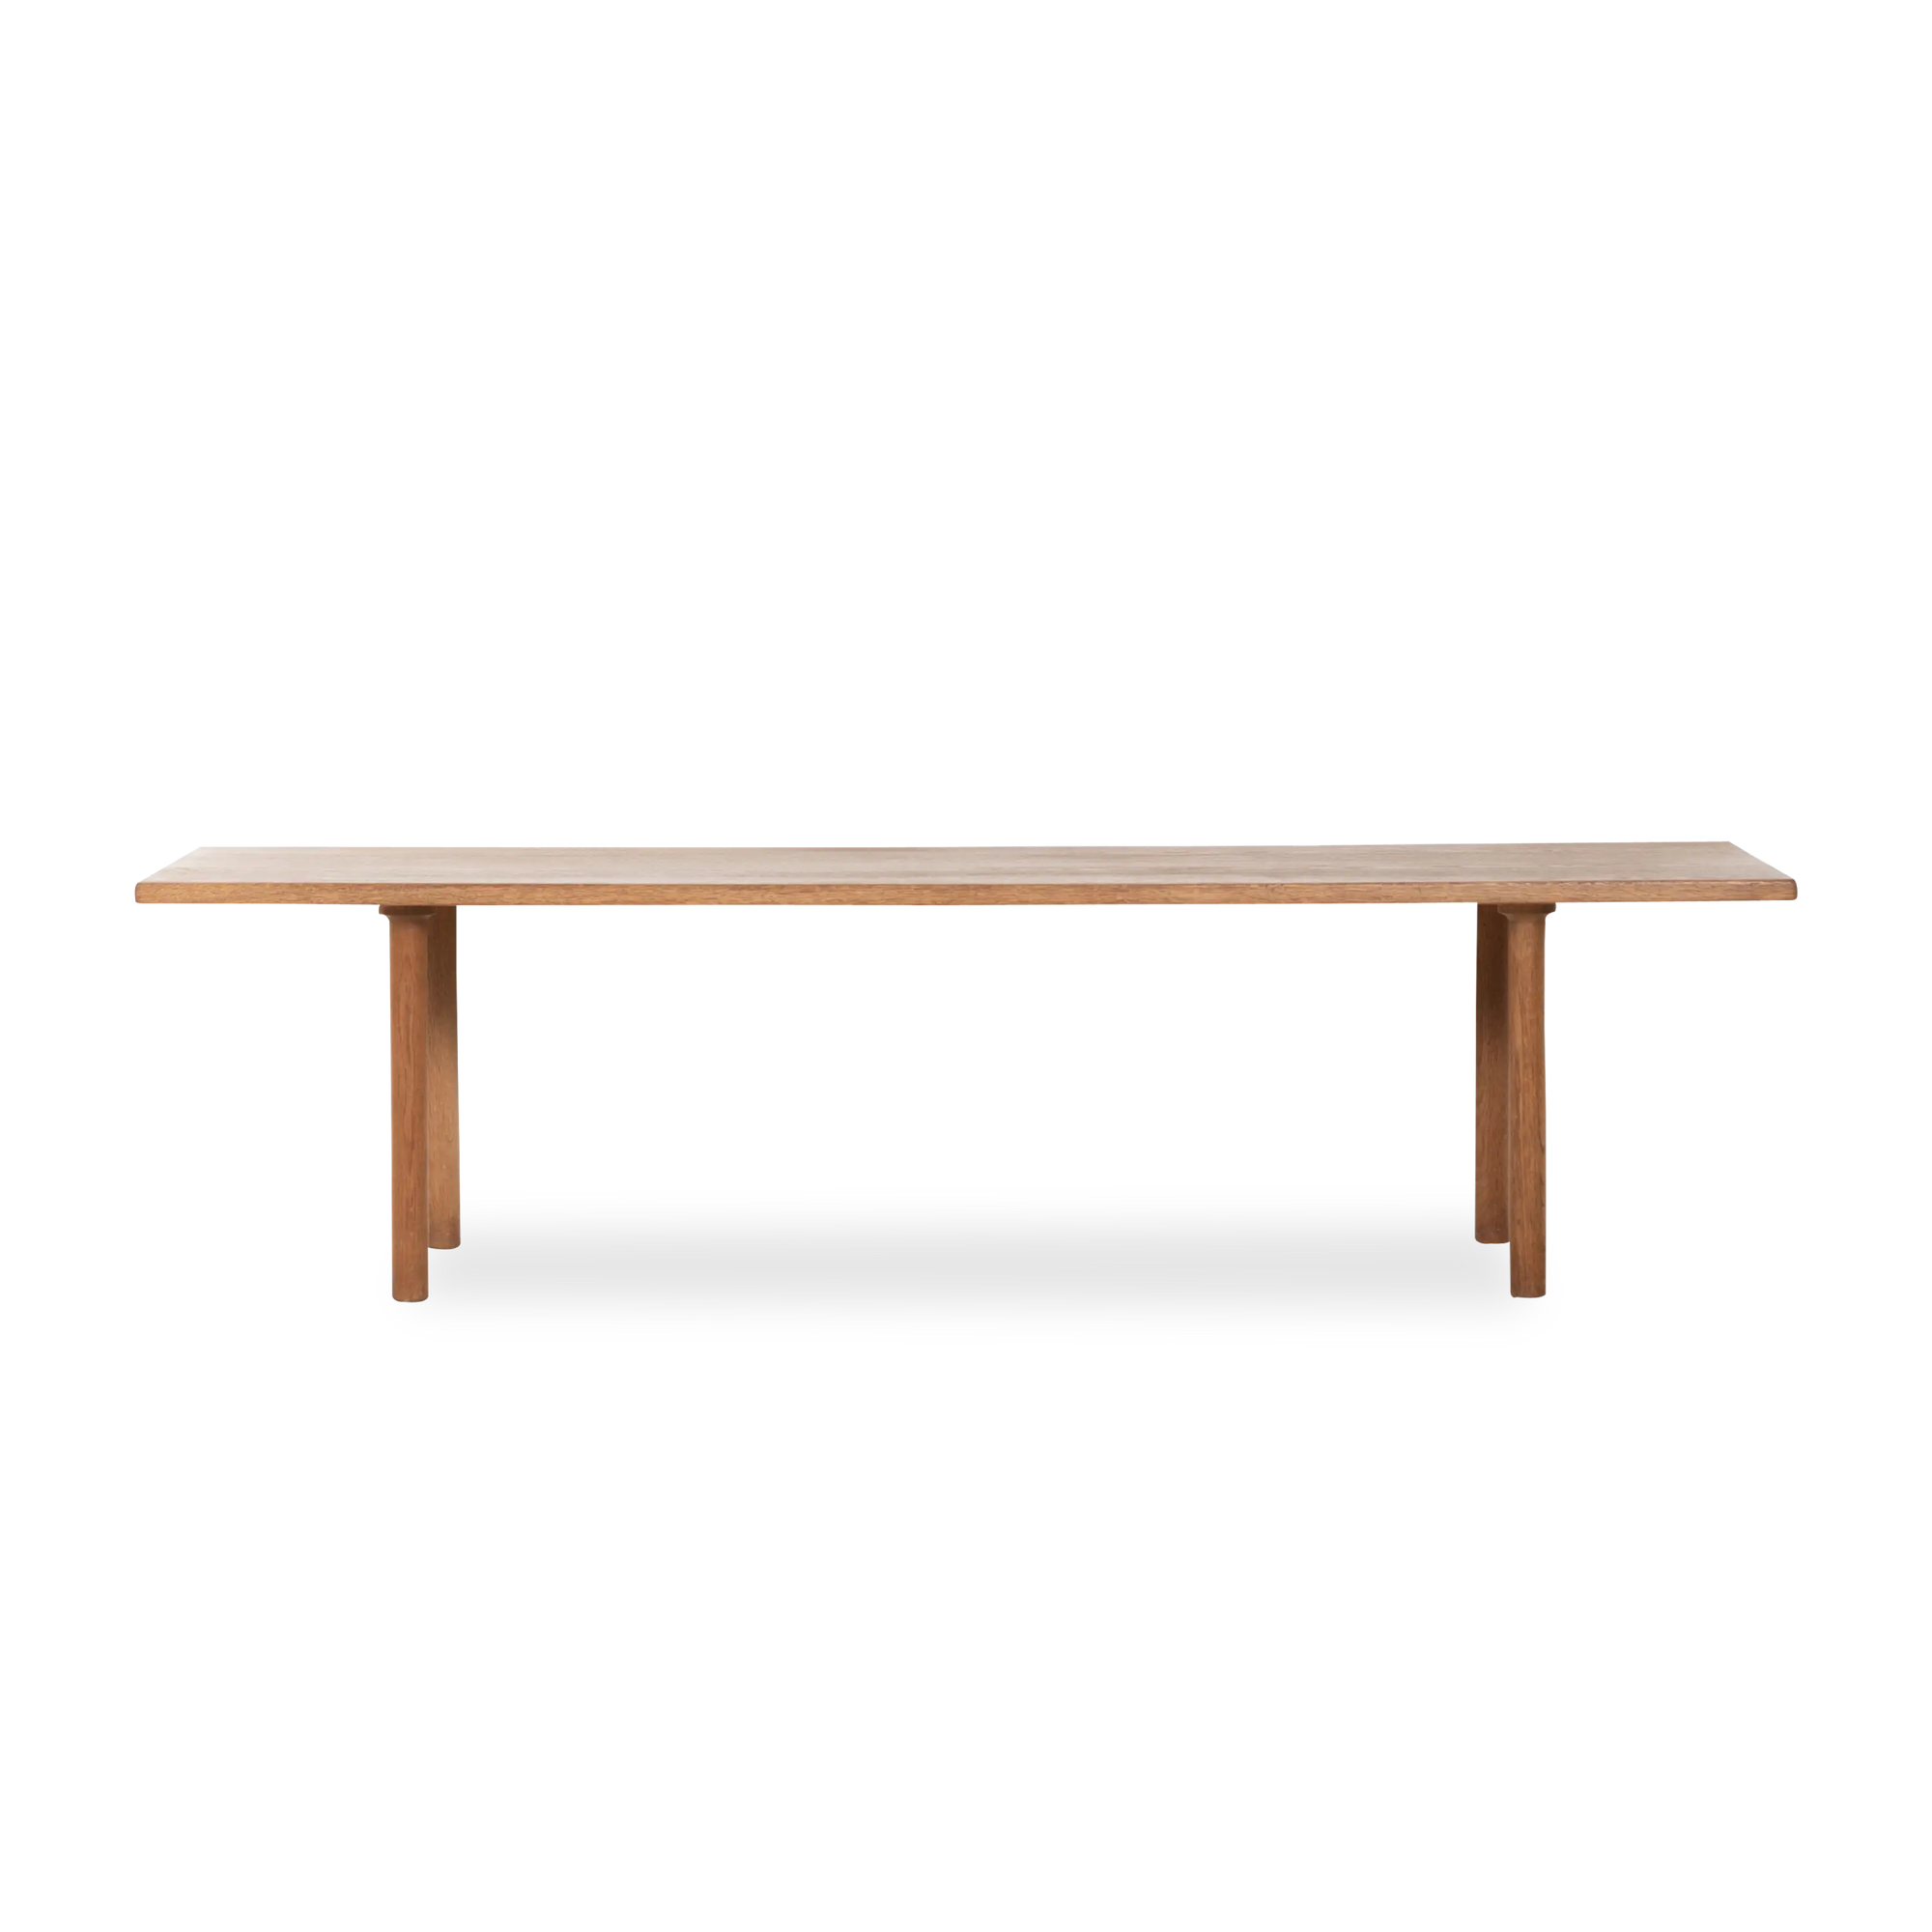 Elegantly simplistic, this vintage AT-12 Coffee Table was designed by Hans Wegner and manufactured by Andreas Tuck, circa 1960s.